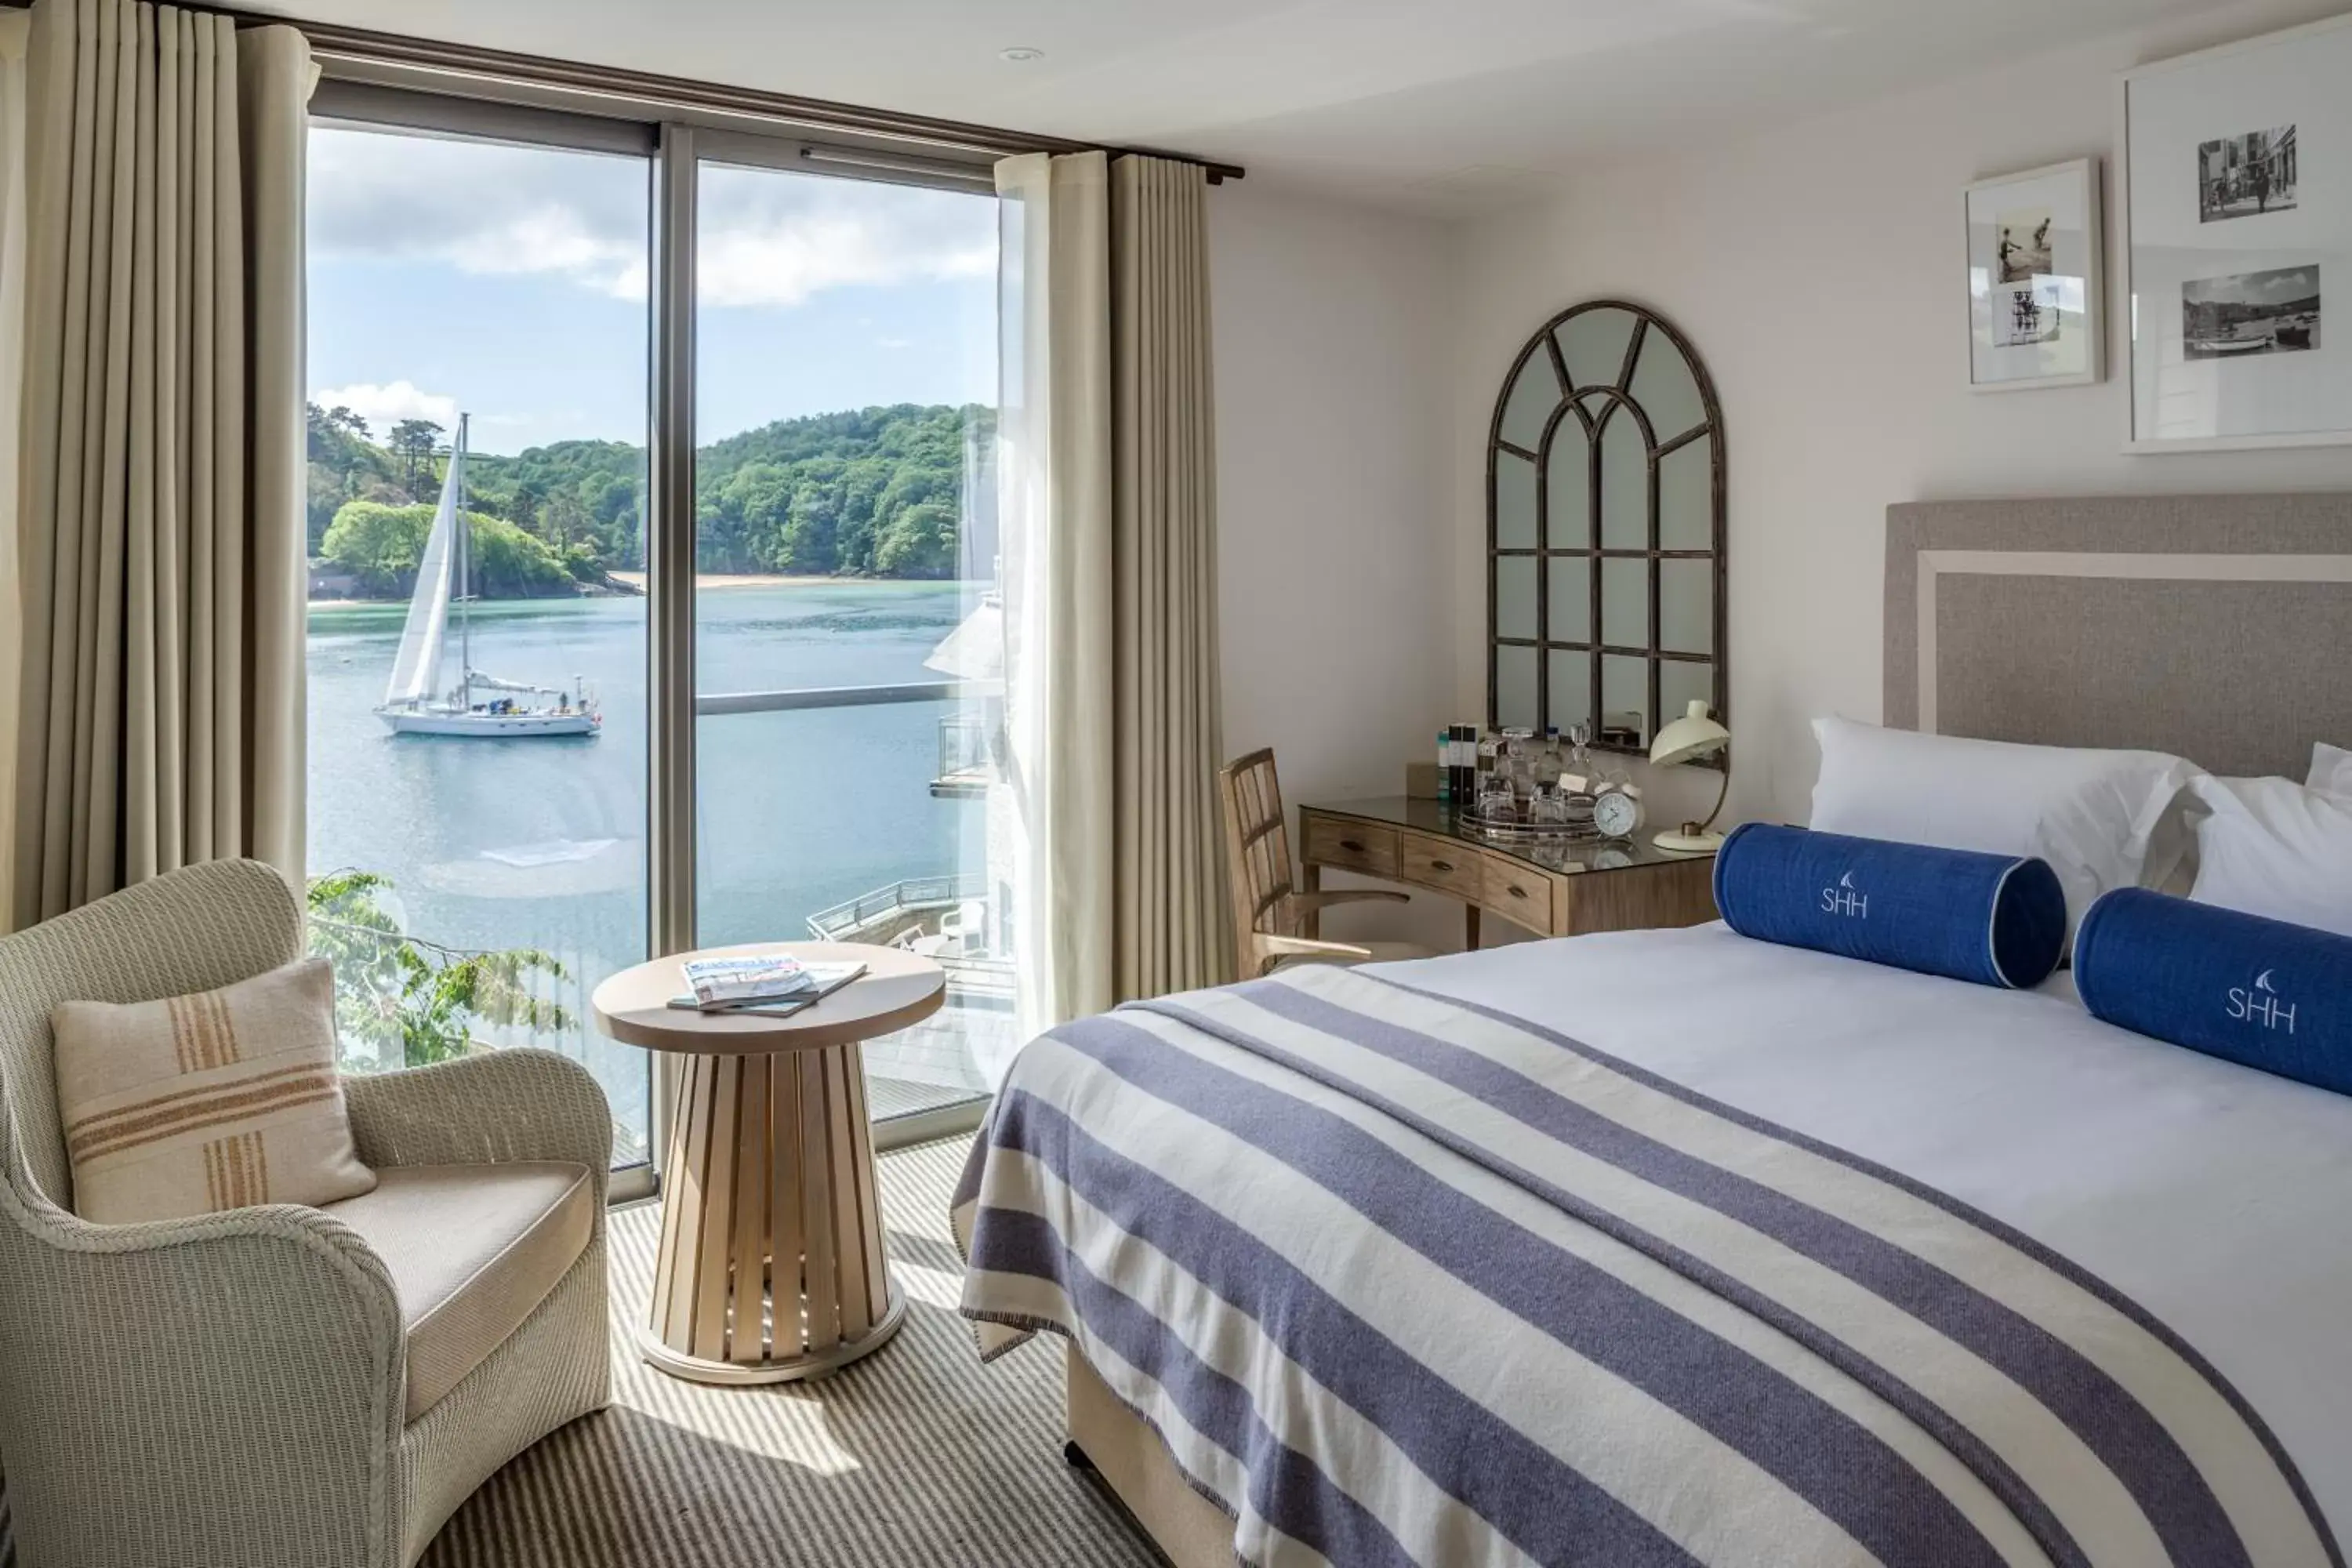 Double Room with Estuary Glimpse and Balcony in Harbour Hotel Salcombe